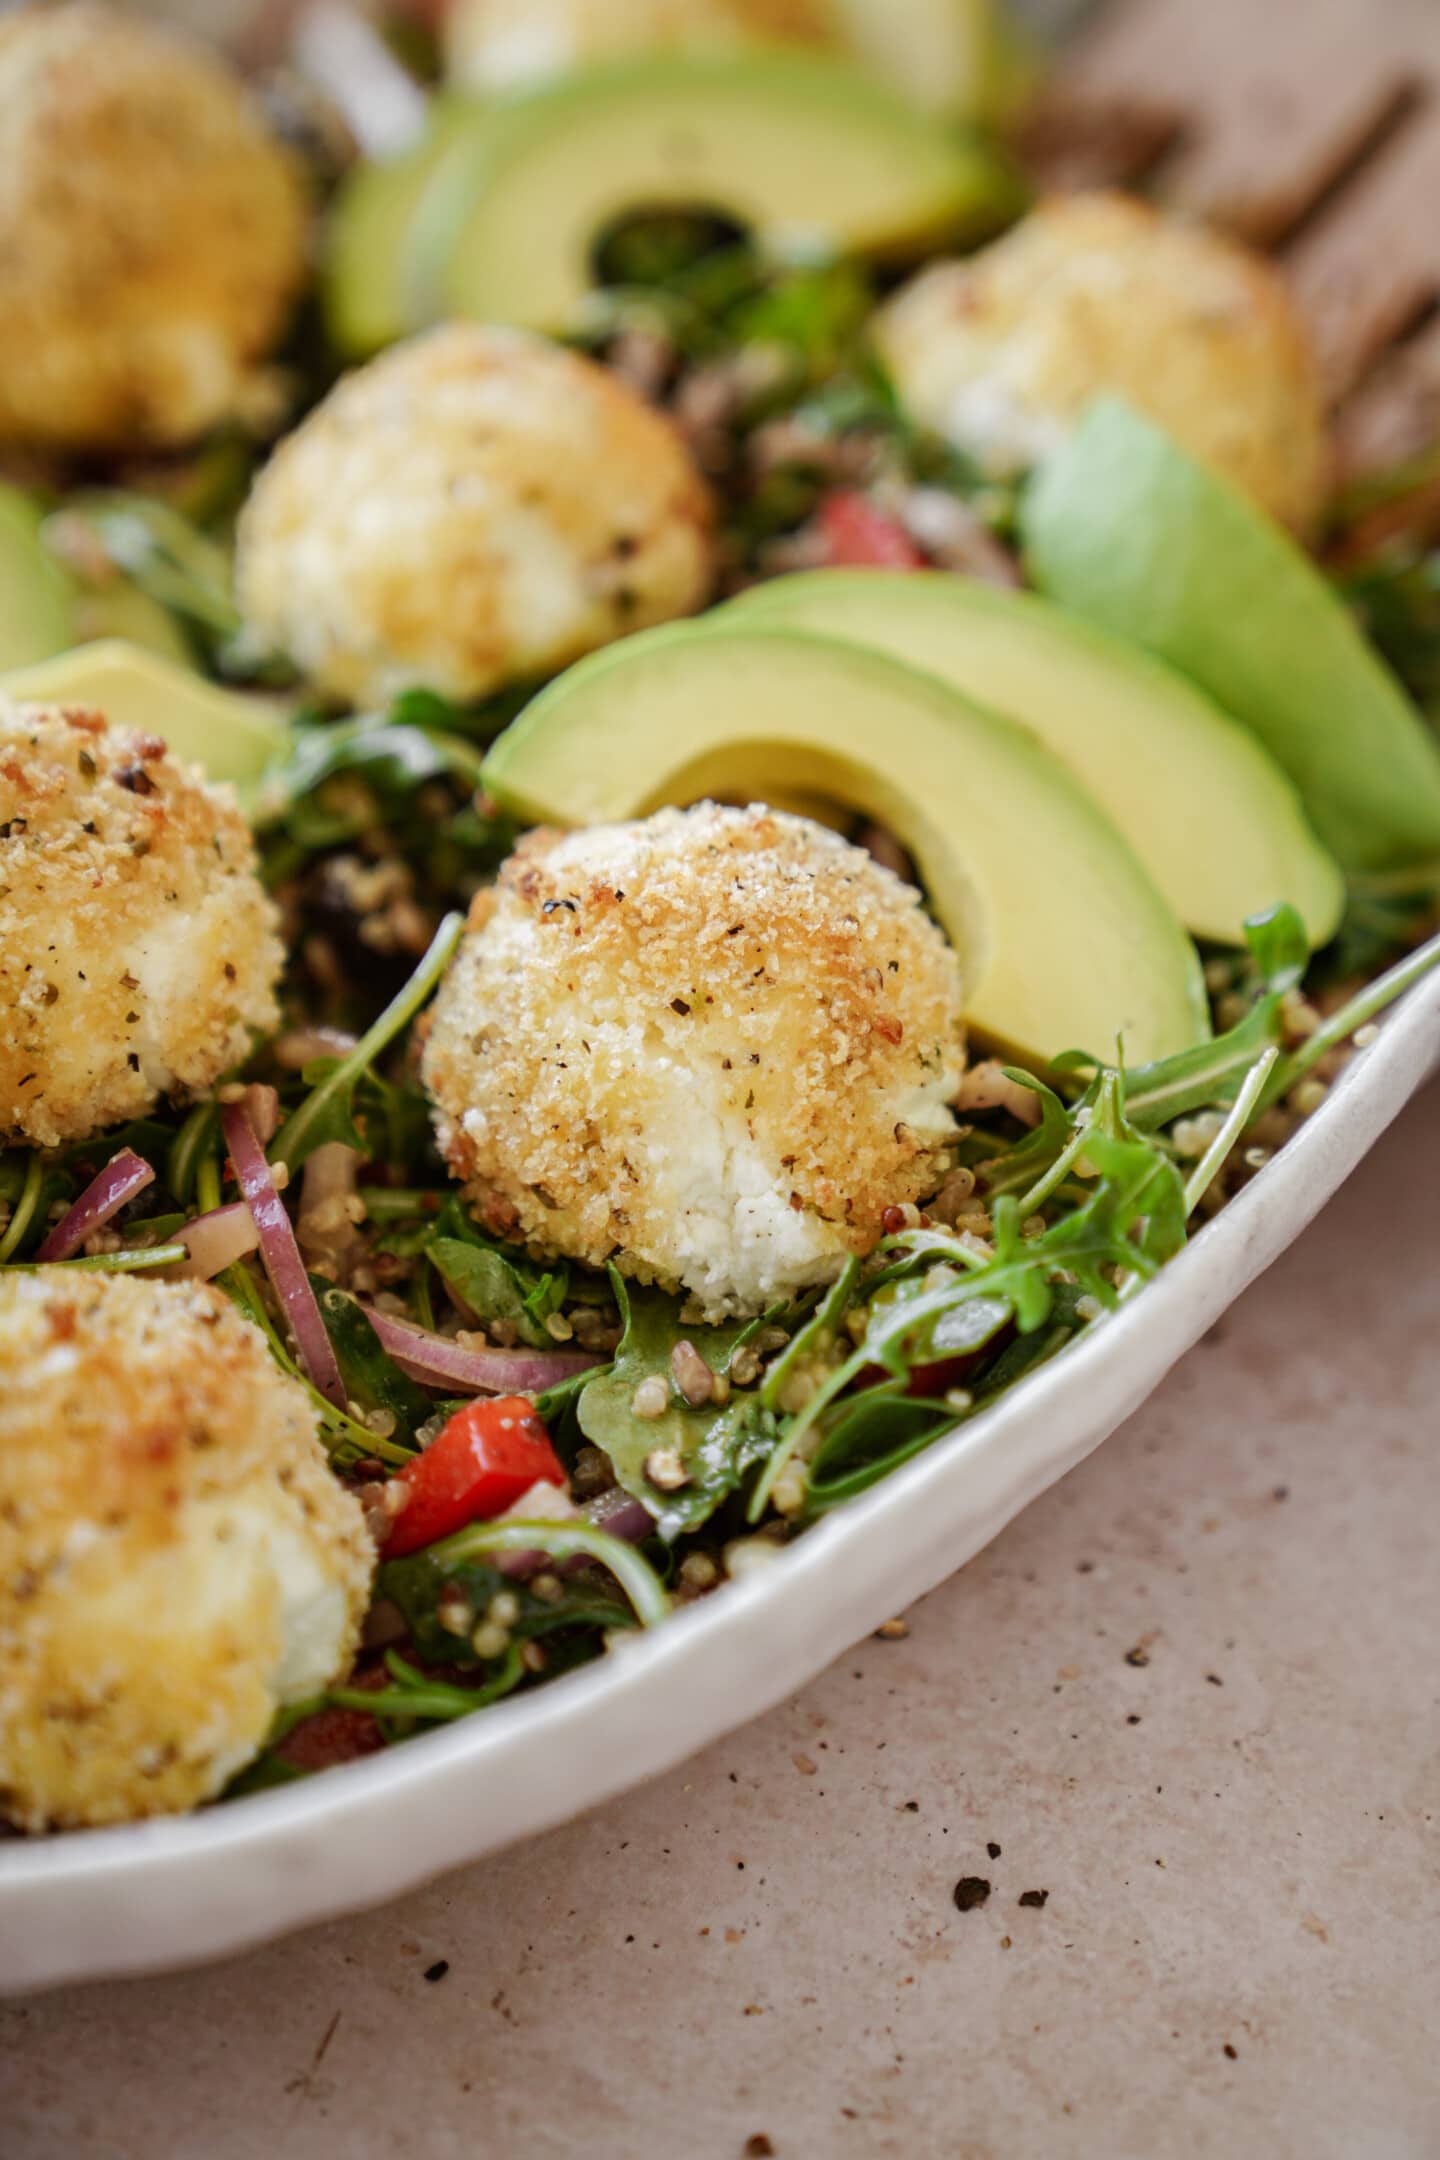 Goat cheese balls in a serving dish